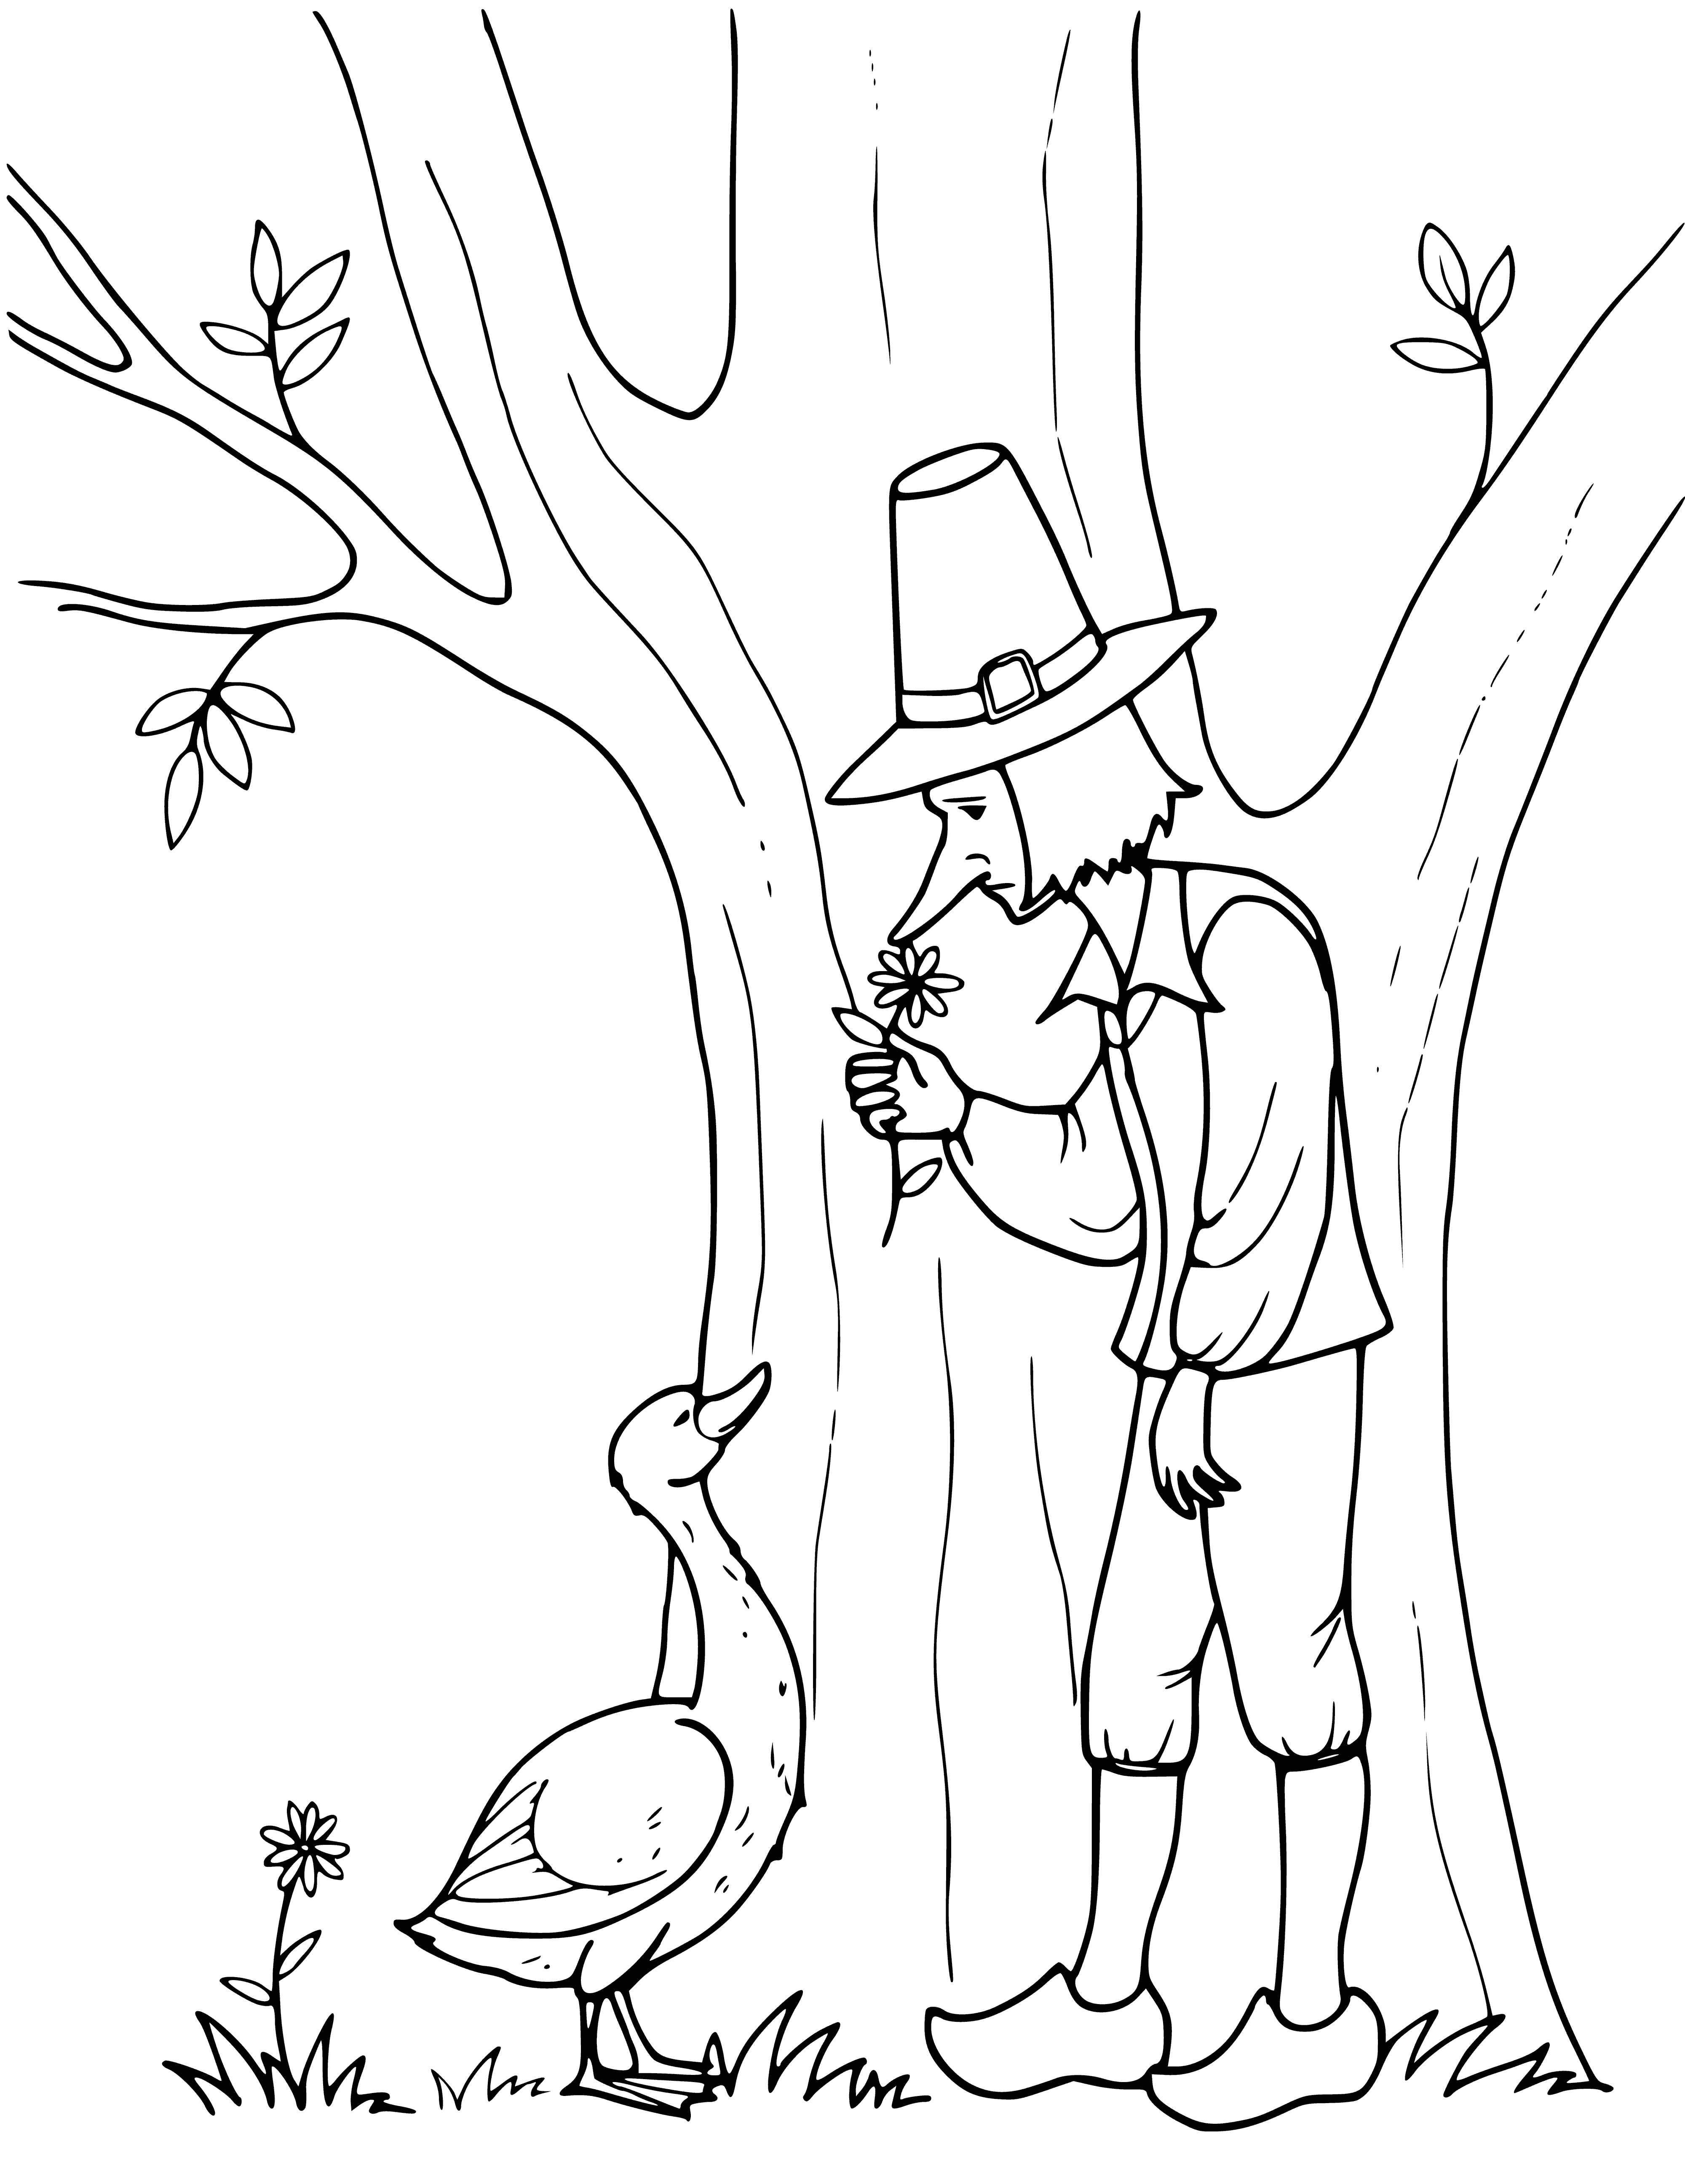 coloring page: Man tells a story with a goose watching from its nest in a large tree while a crowd of people listen. #Storytime